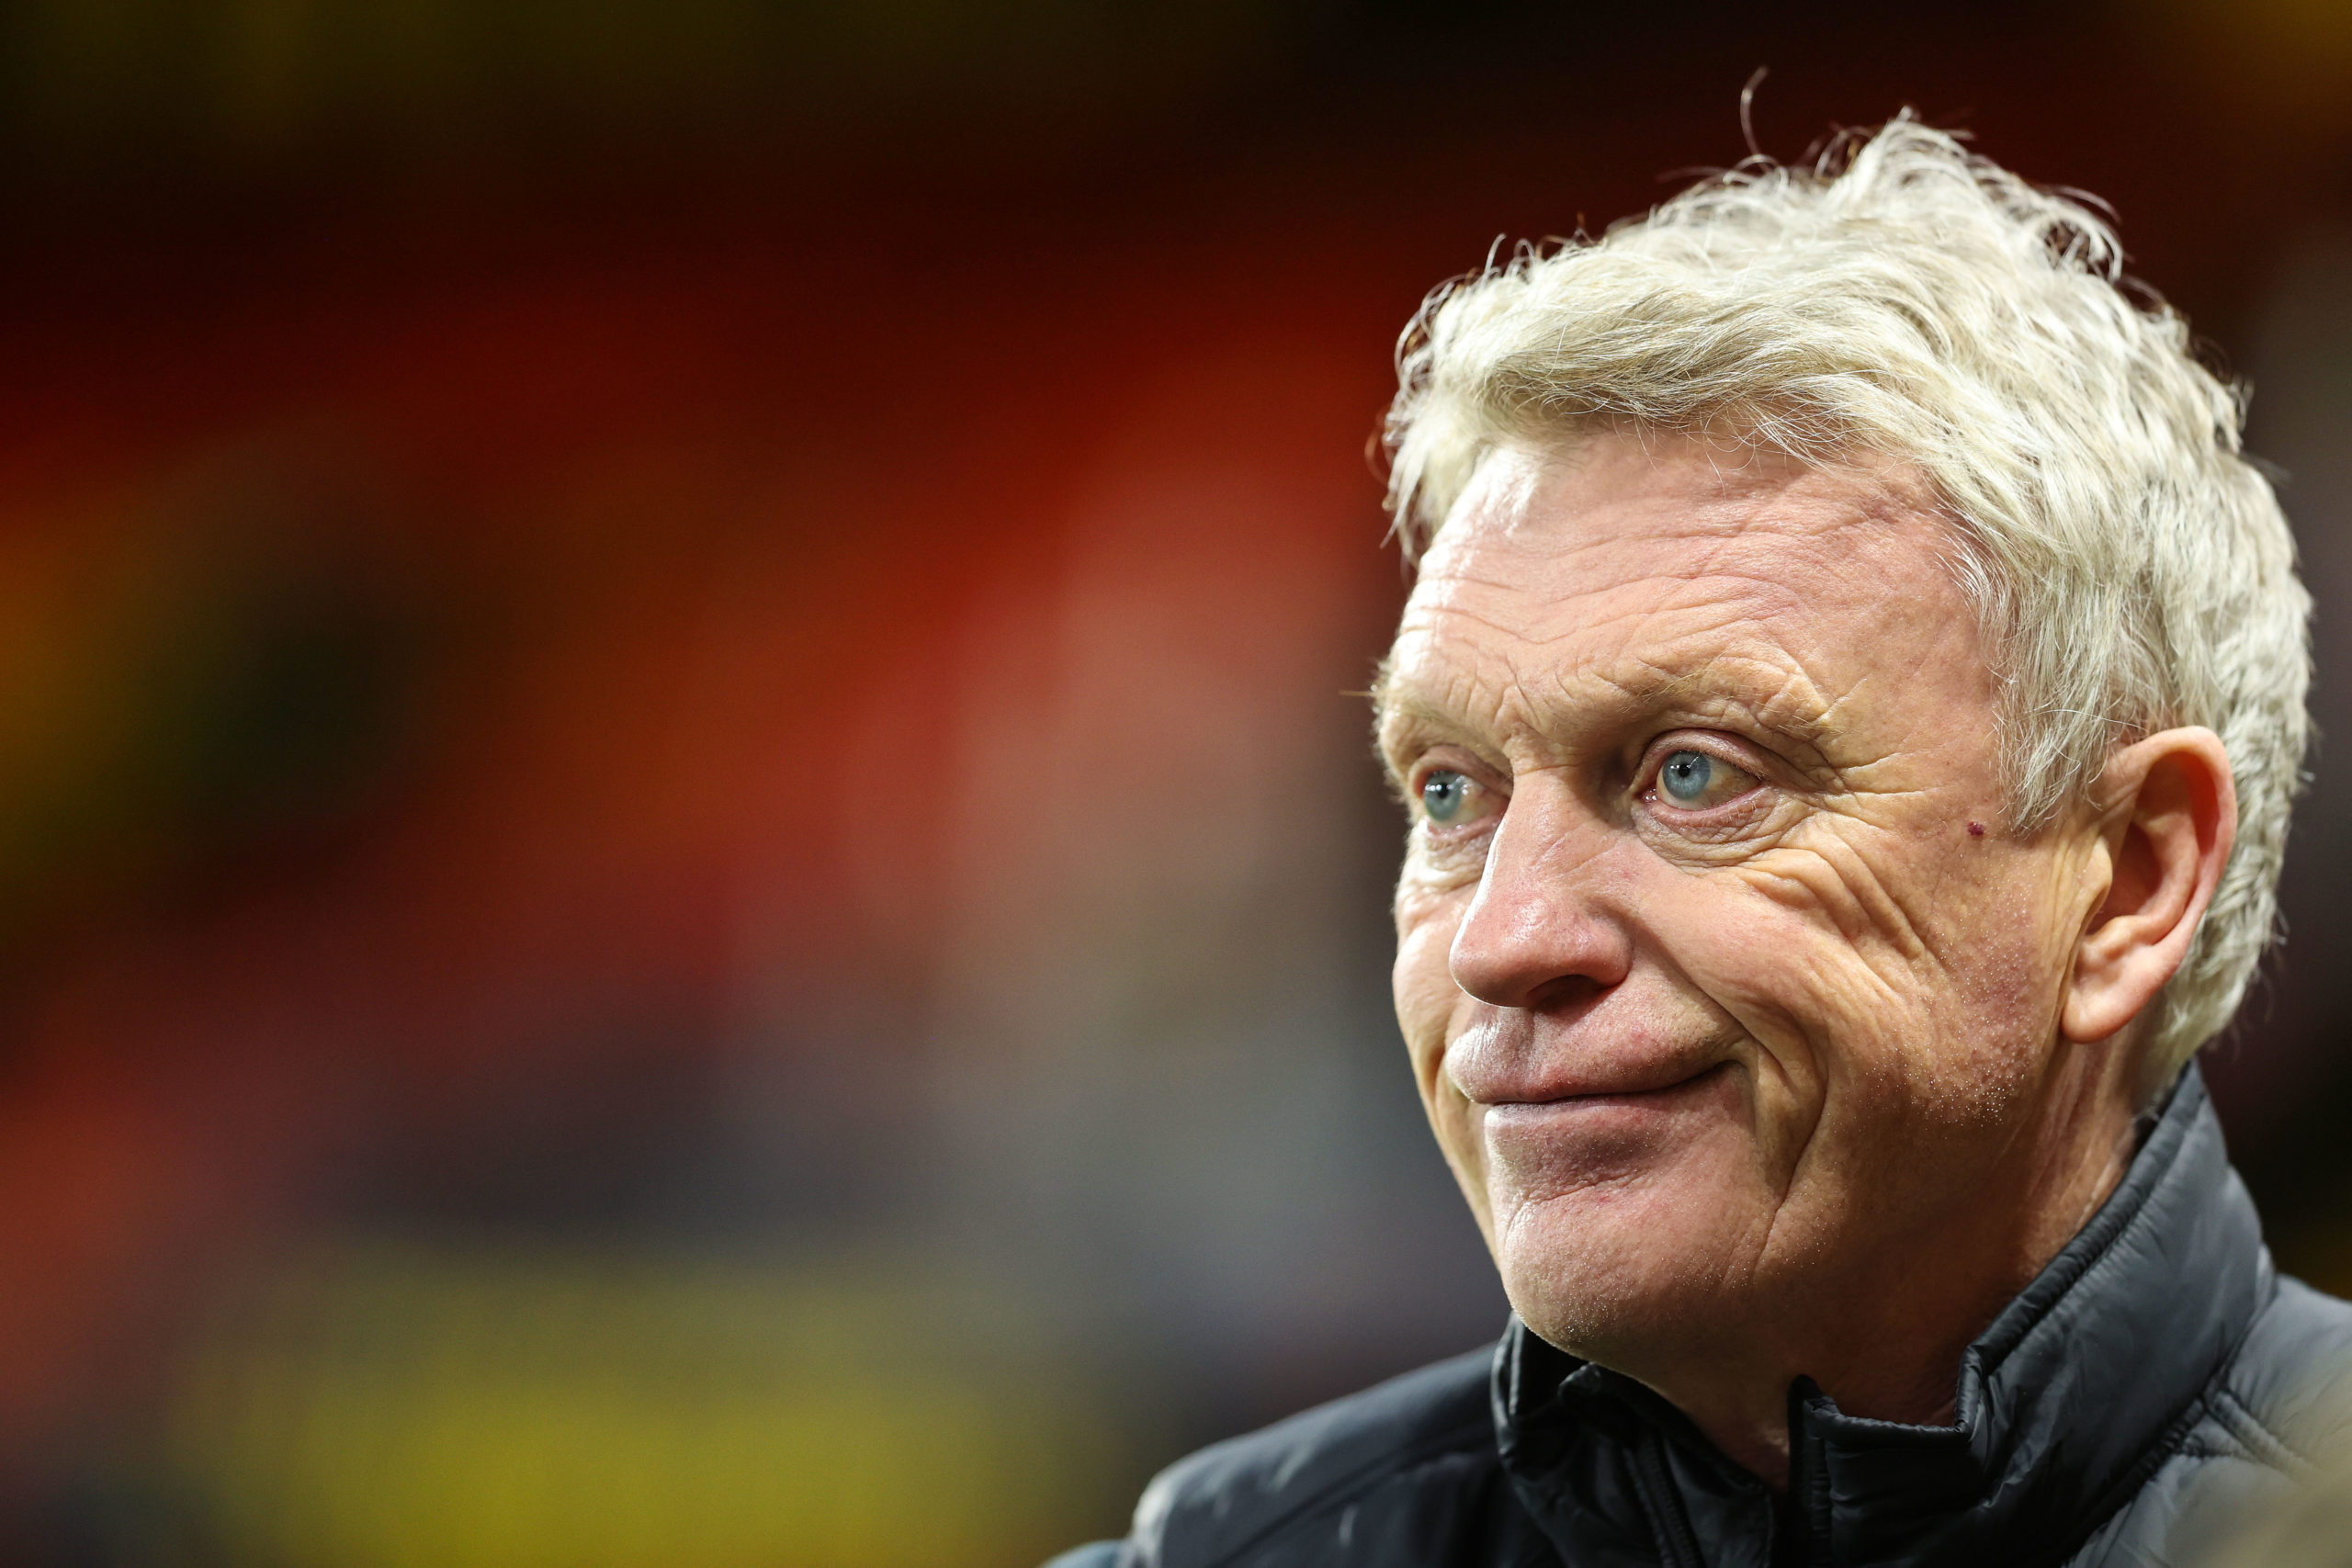 West Ham boss David Moyes denies striking £10m deal with Newcastle over transfer